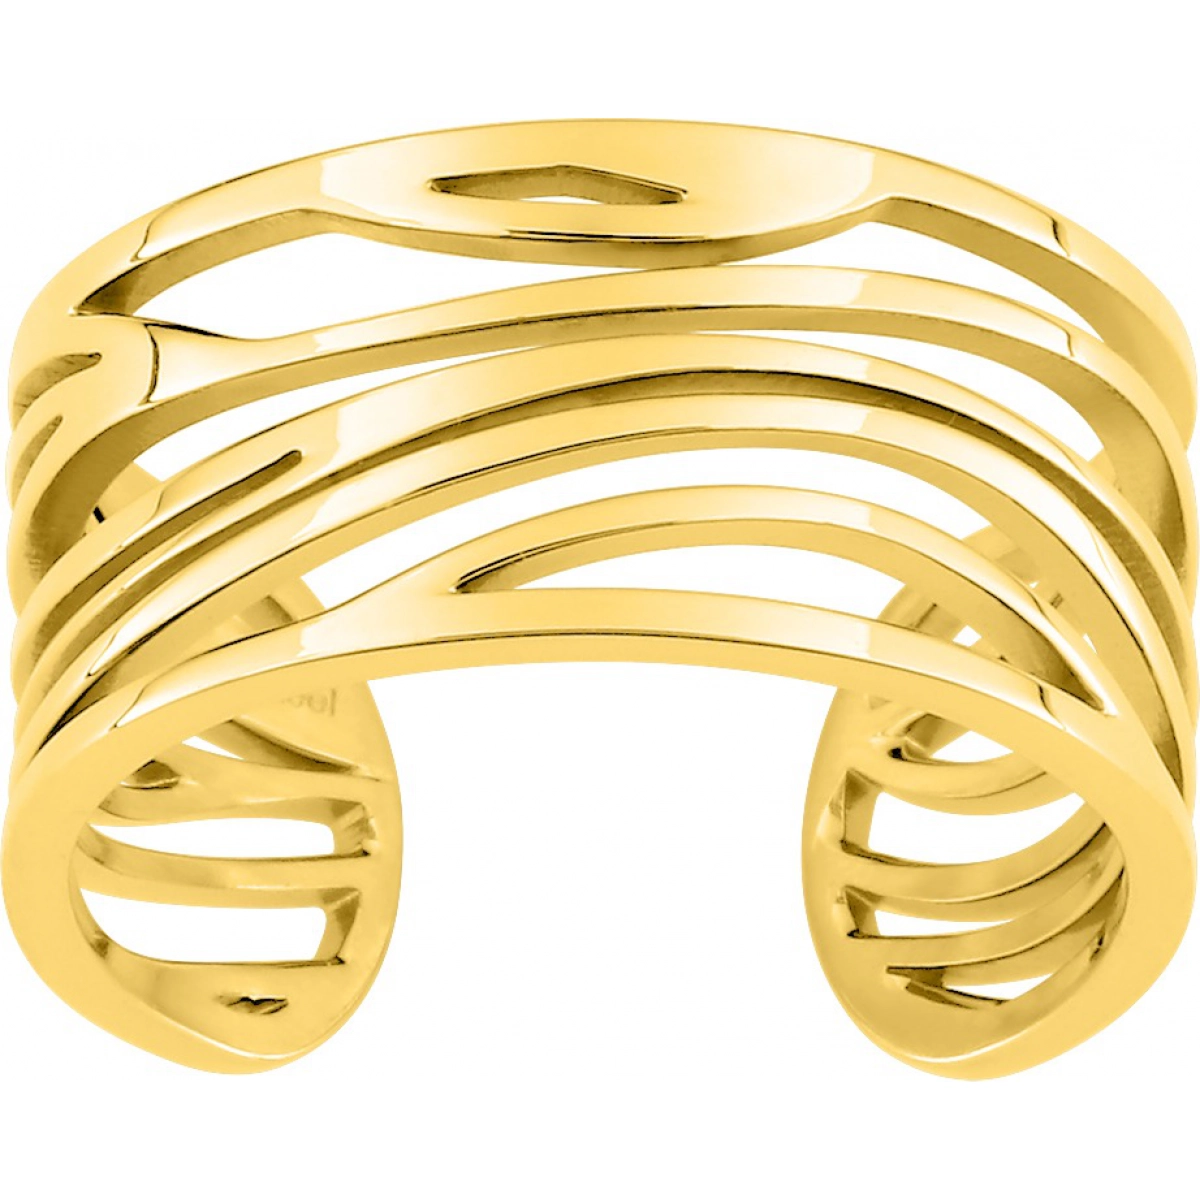 Ring gold colored St. Steel Lua Blanca  550541 